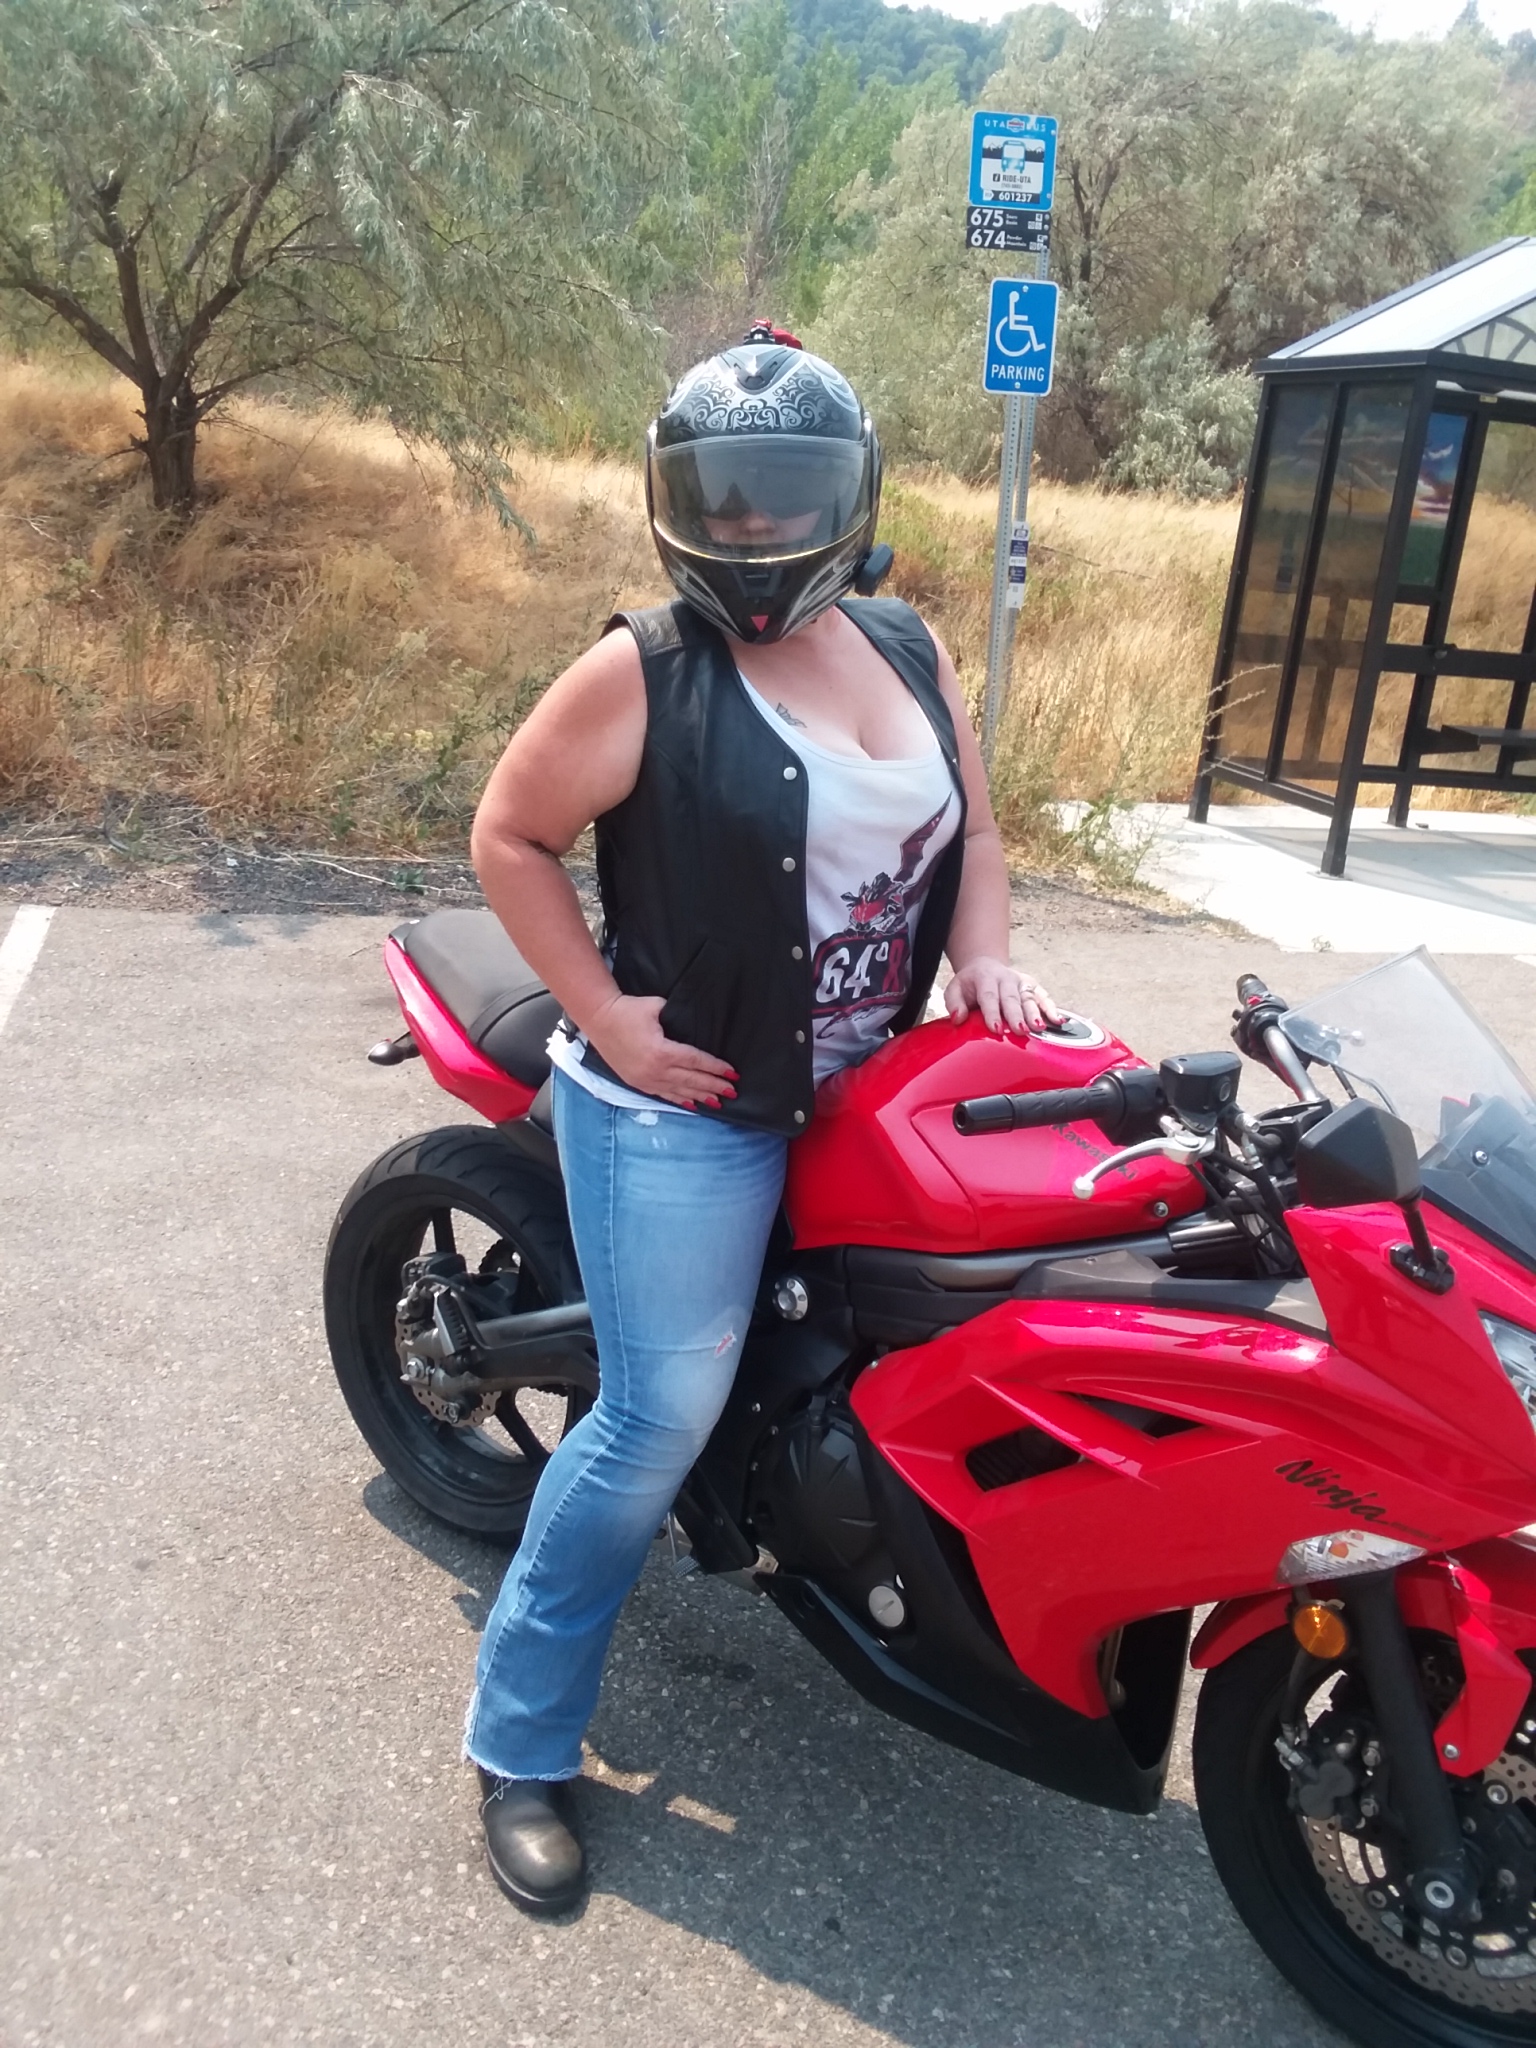 A woman sits astride a red Kawasaki Ninja 650. She is wearing the Rowdy Women's Vest. She wears a white tank top, which displays the image of an aggressive dragon styled after the fairings of a super-sport motorcycle. Behind the woman is a grassy field with scattered trees and a public bus stop.